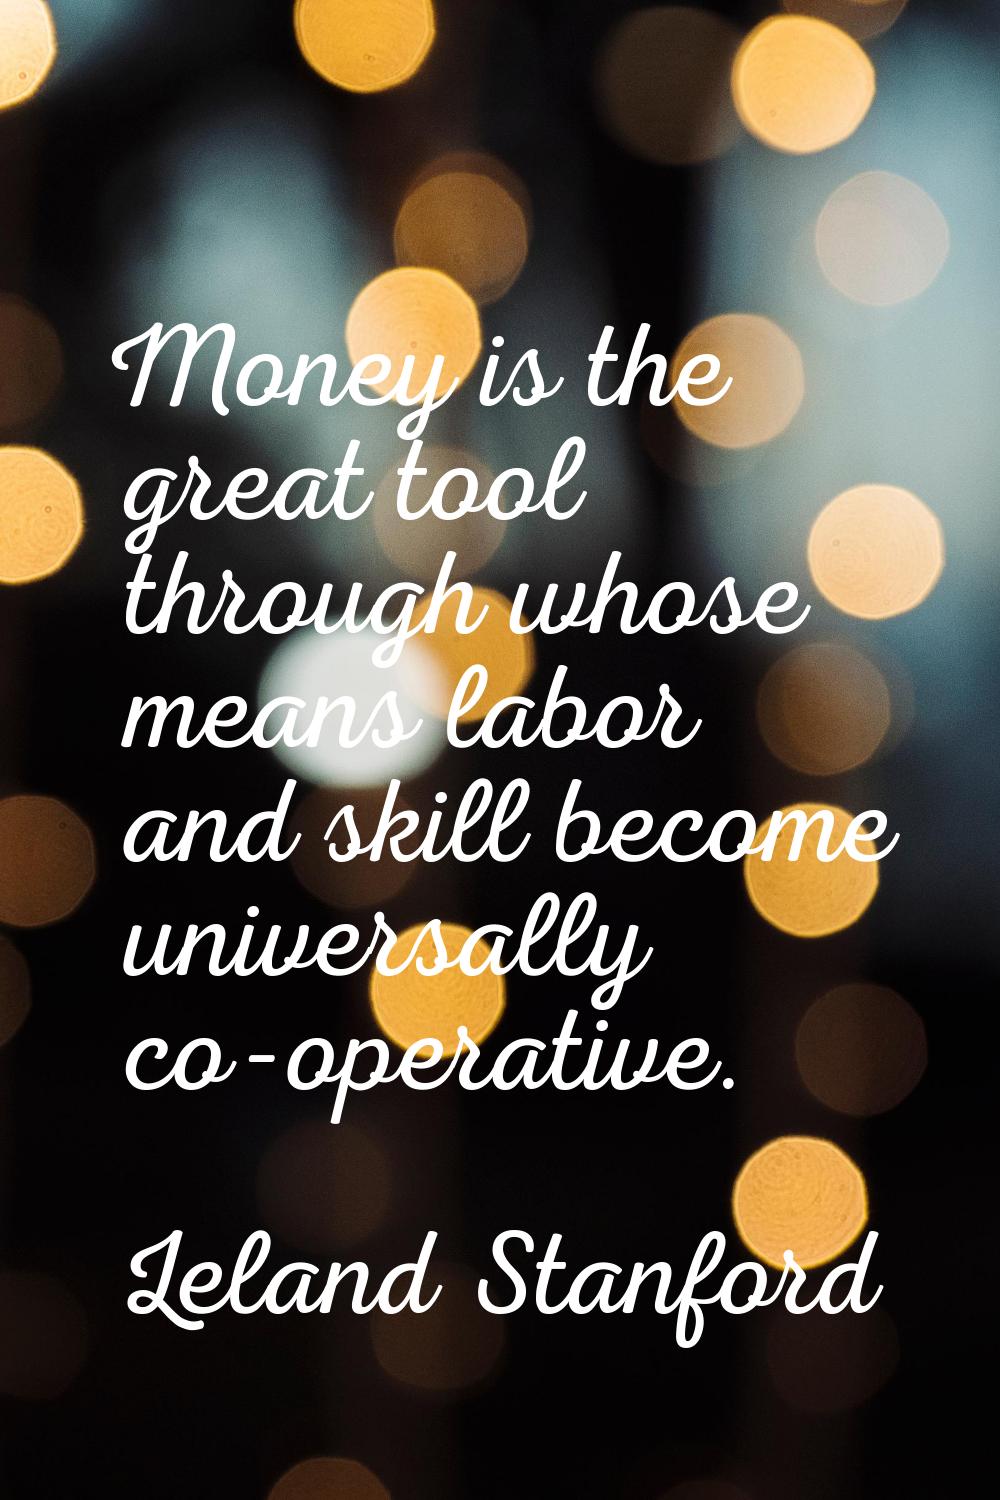 Money is the great tool through whose means labor and skill become universally co-operative.